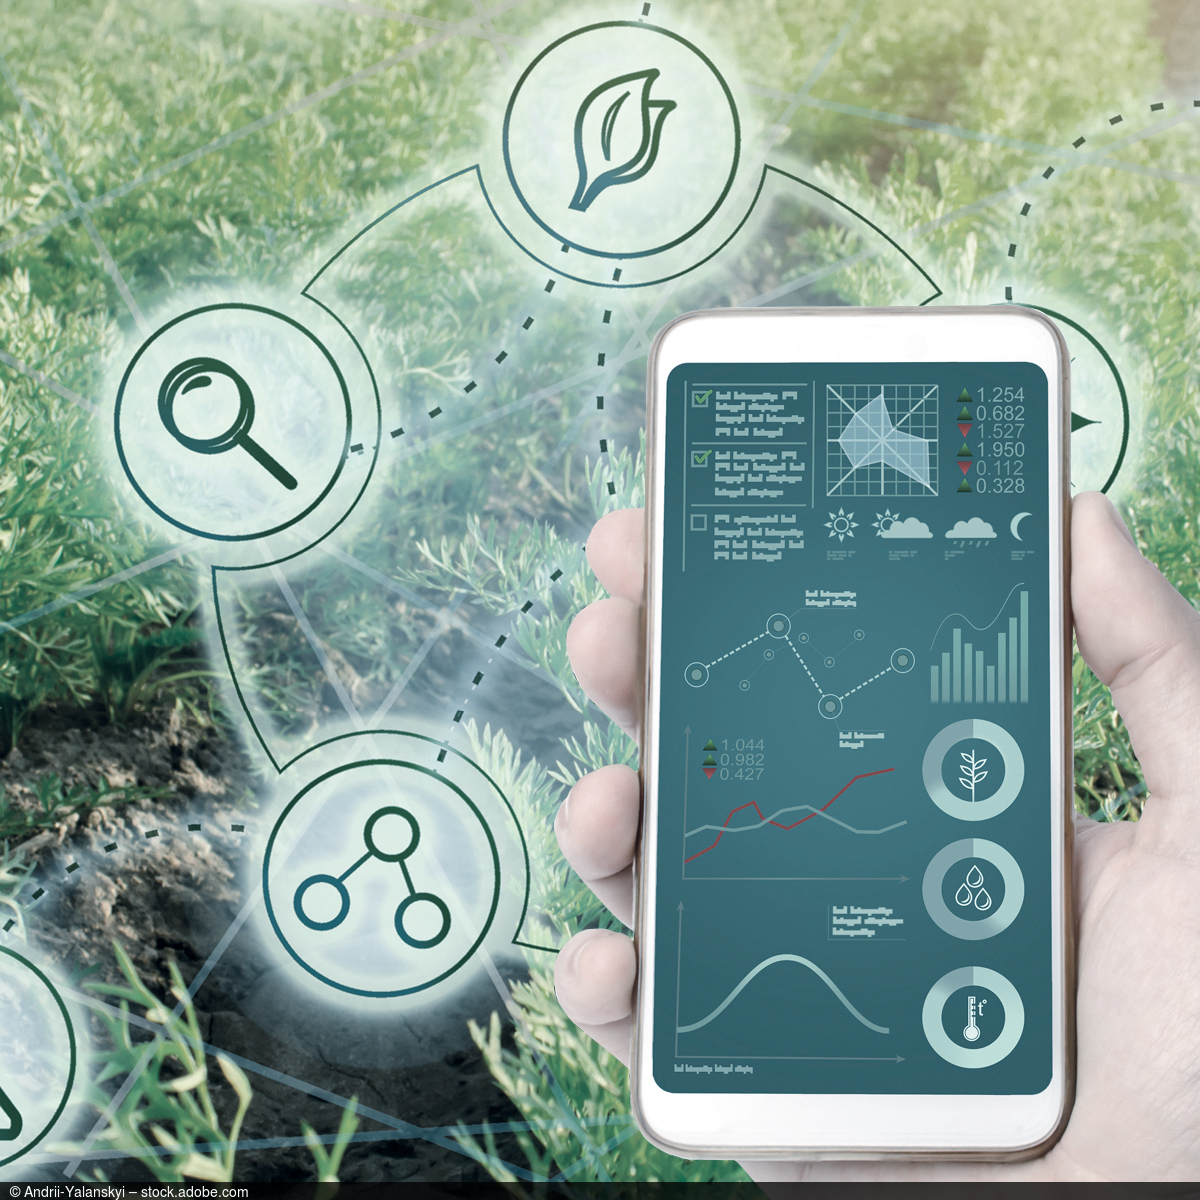 An app is open on a smartphone that graphically displays various environmental factors. In the background, the image shows a green field.